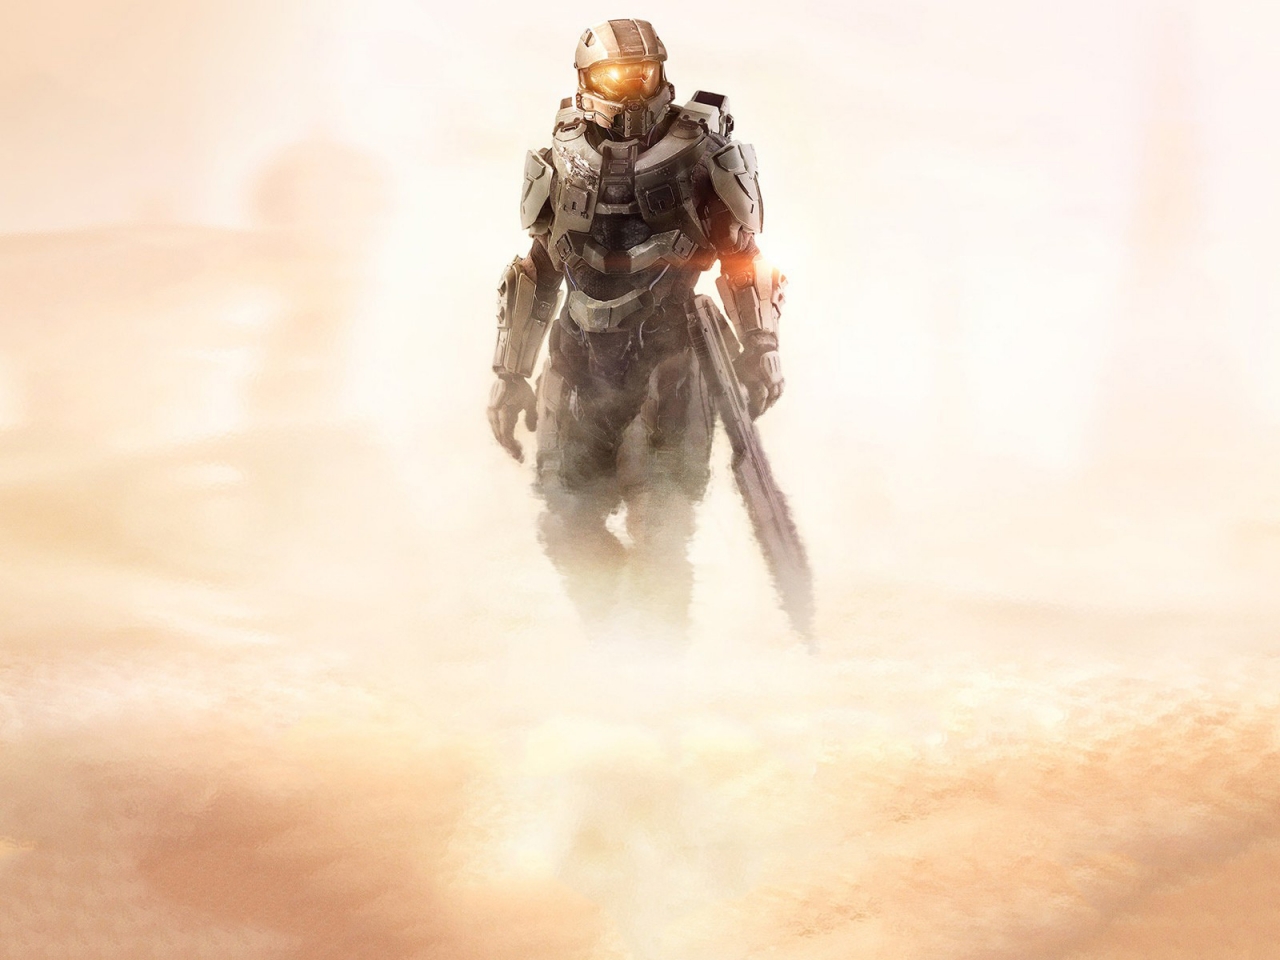 Halo 5 Guardians for 1280 x 960 resolution